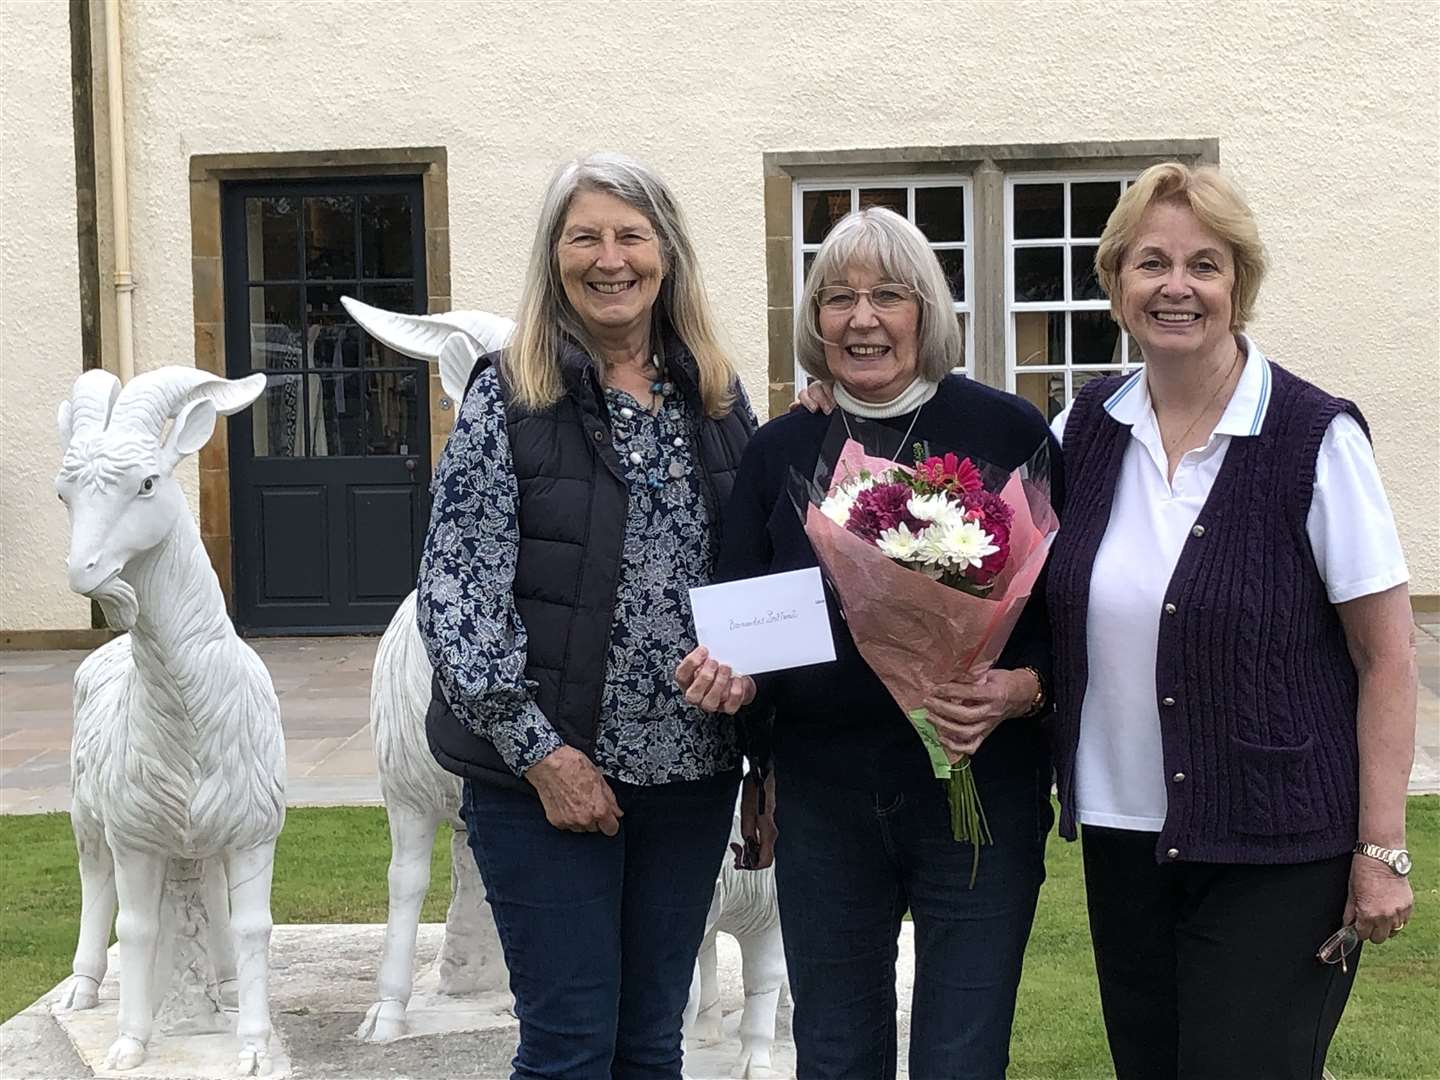 Philippa Buckingham and Kit Pawson of the Bennachie Barnado's Helpers group accepted a donation of £1500 from (centre) Izzie Macdonald.